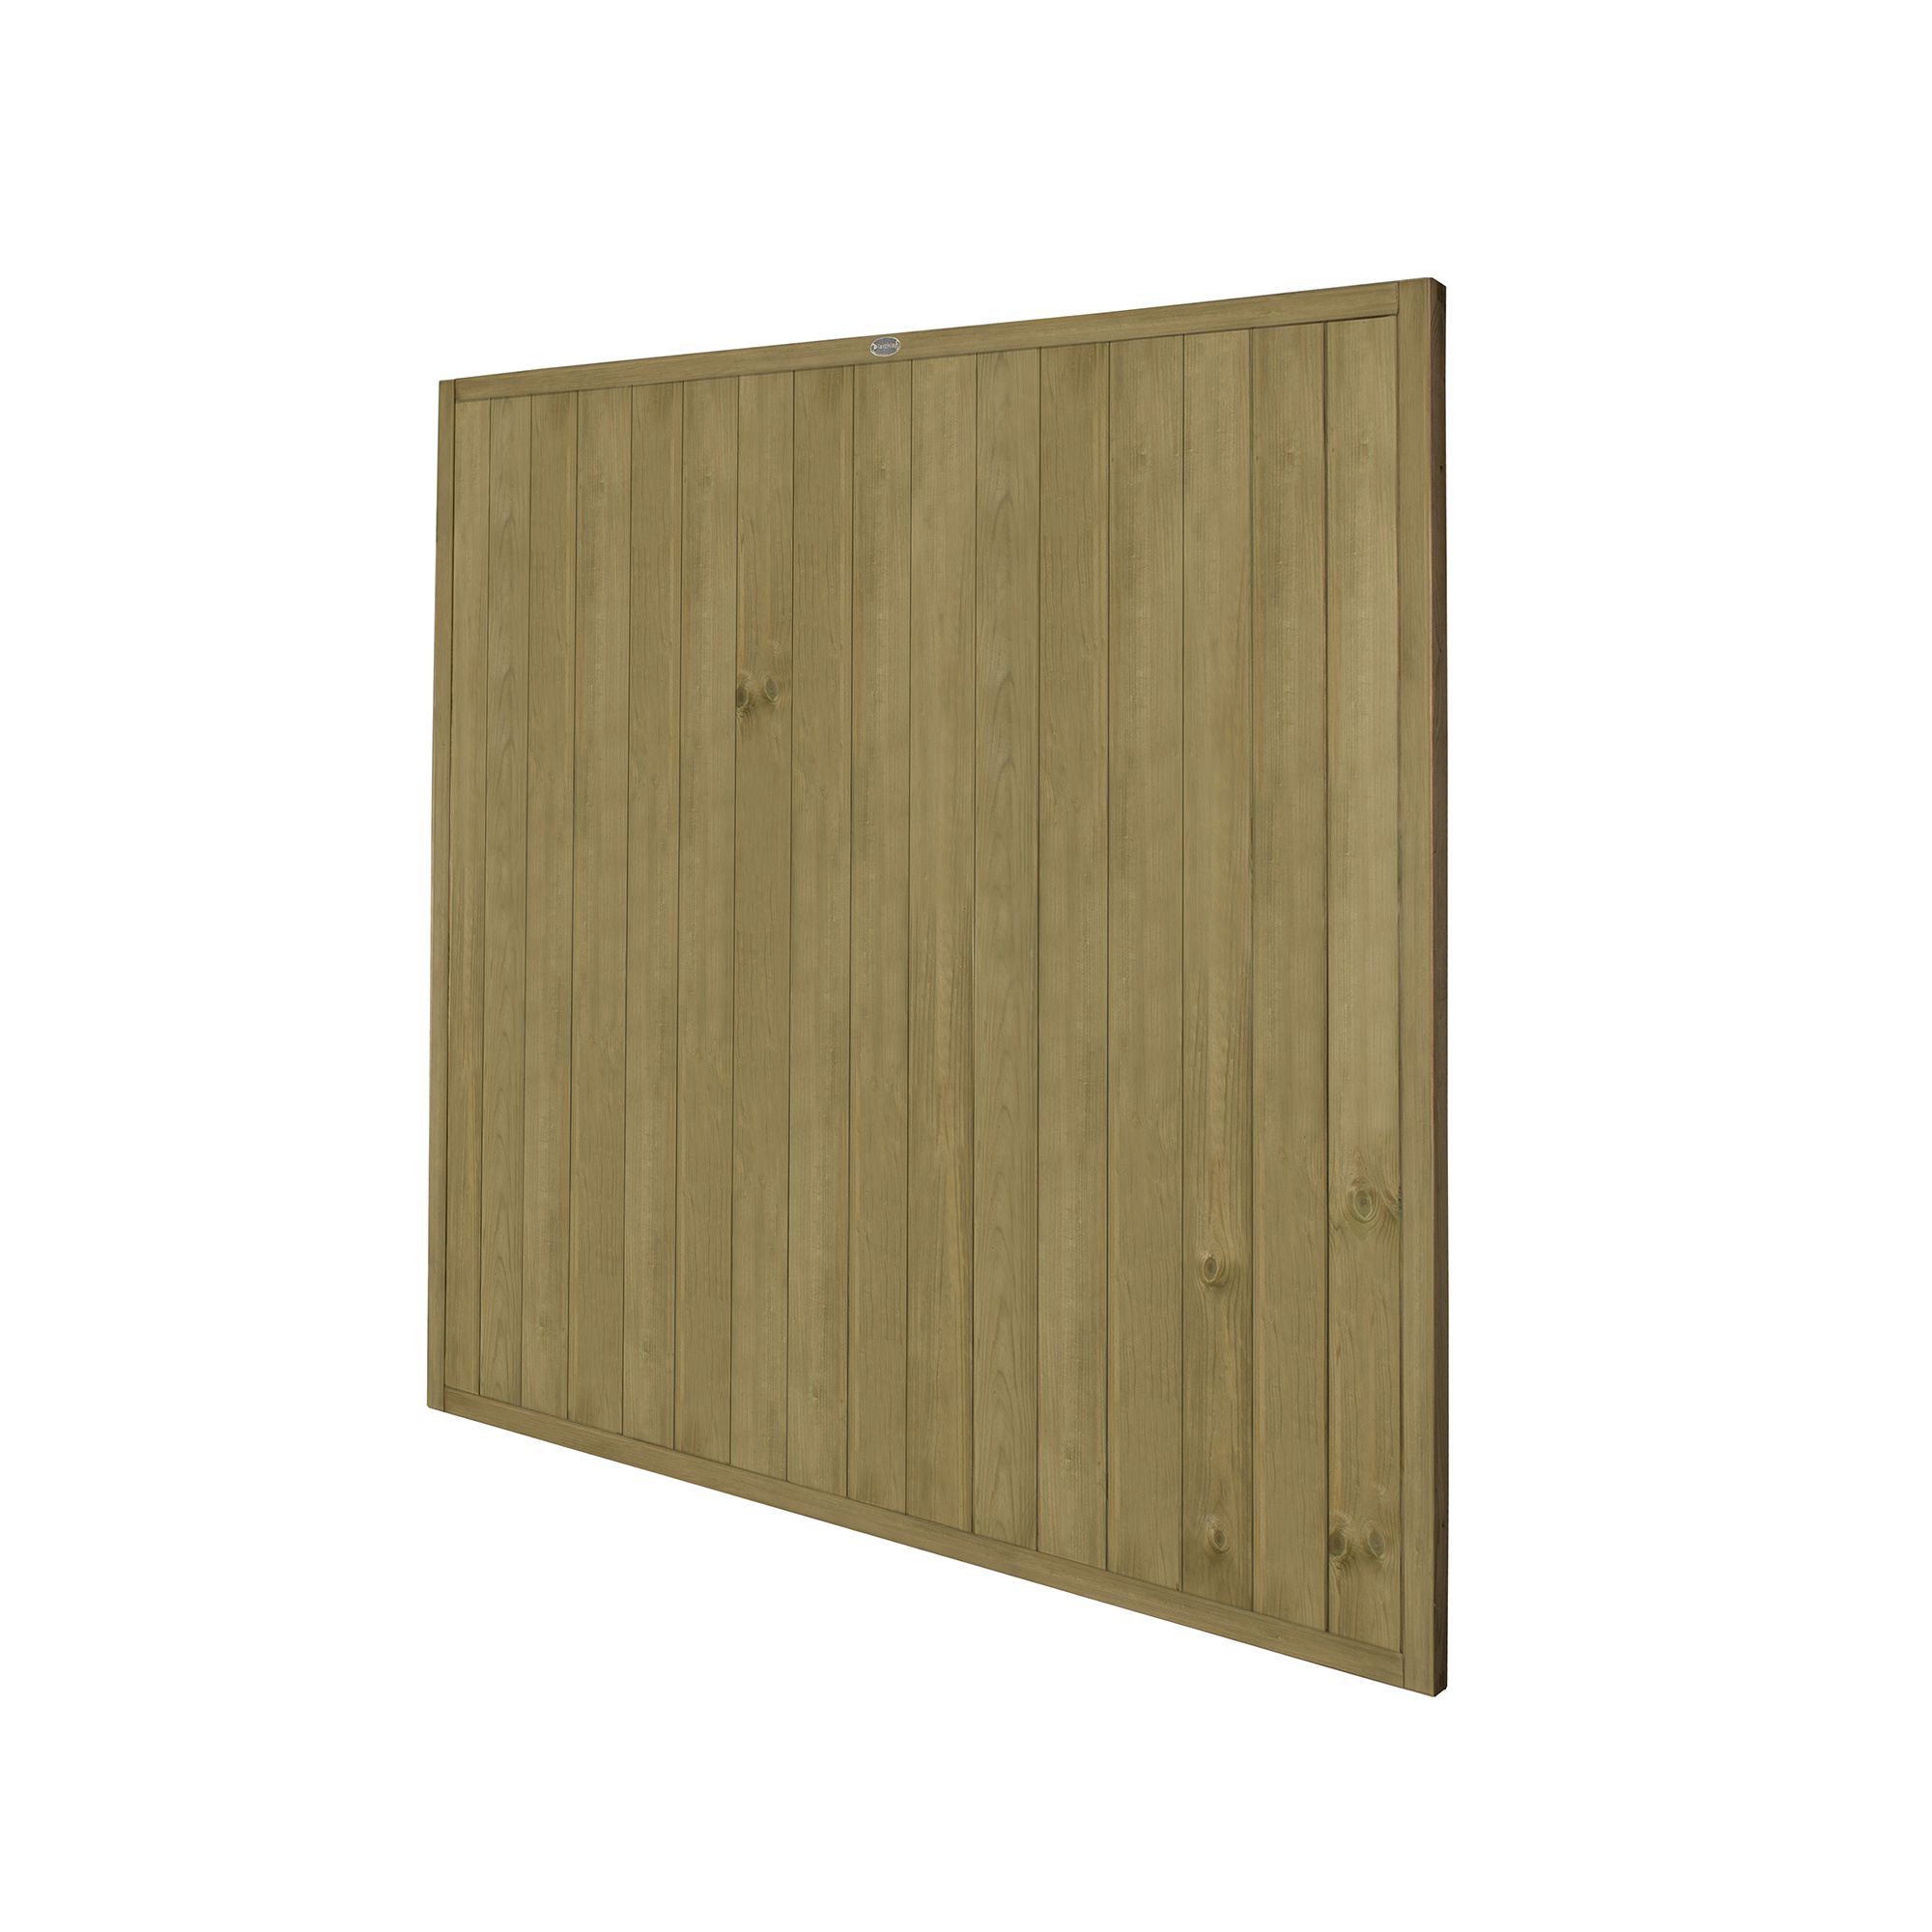 Forest Garden Traditional Tongue & groove 6ft Wooden Fence panel (W)1.83m (H)1.83m, Pack of 4